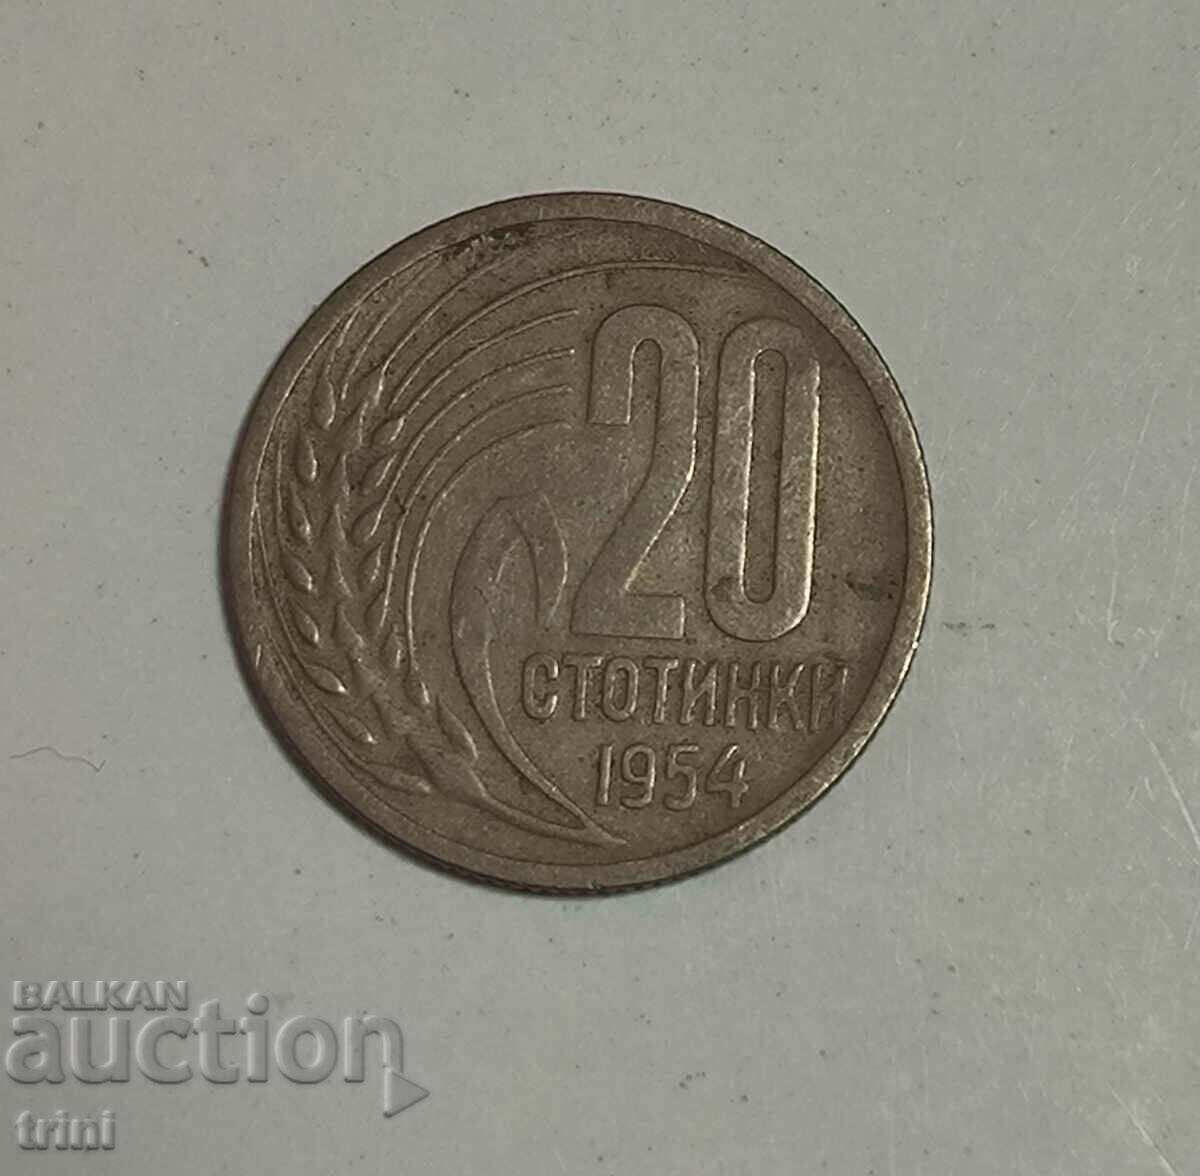 20 cents 1954 year g111